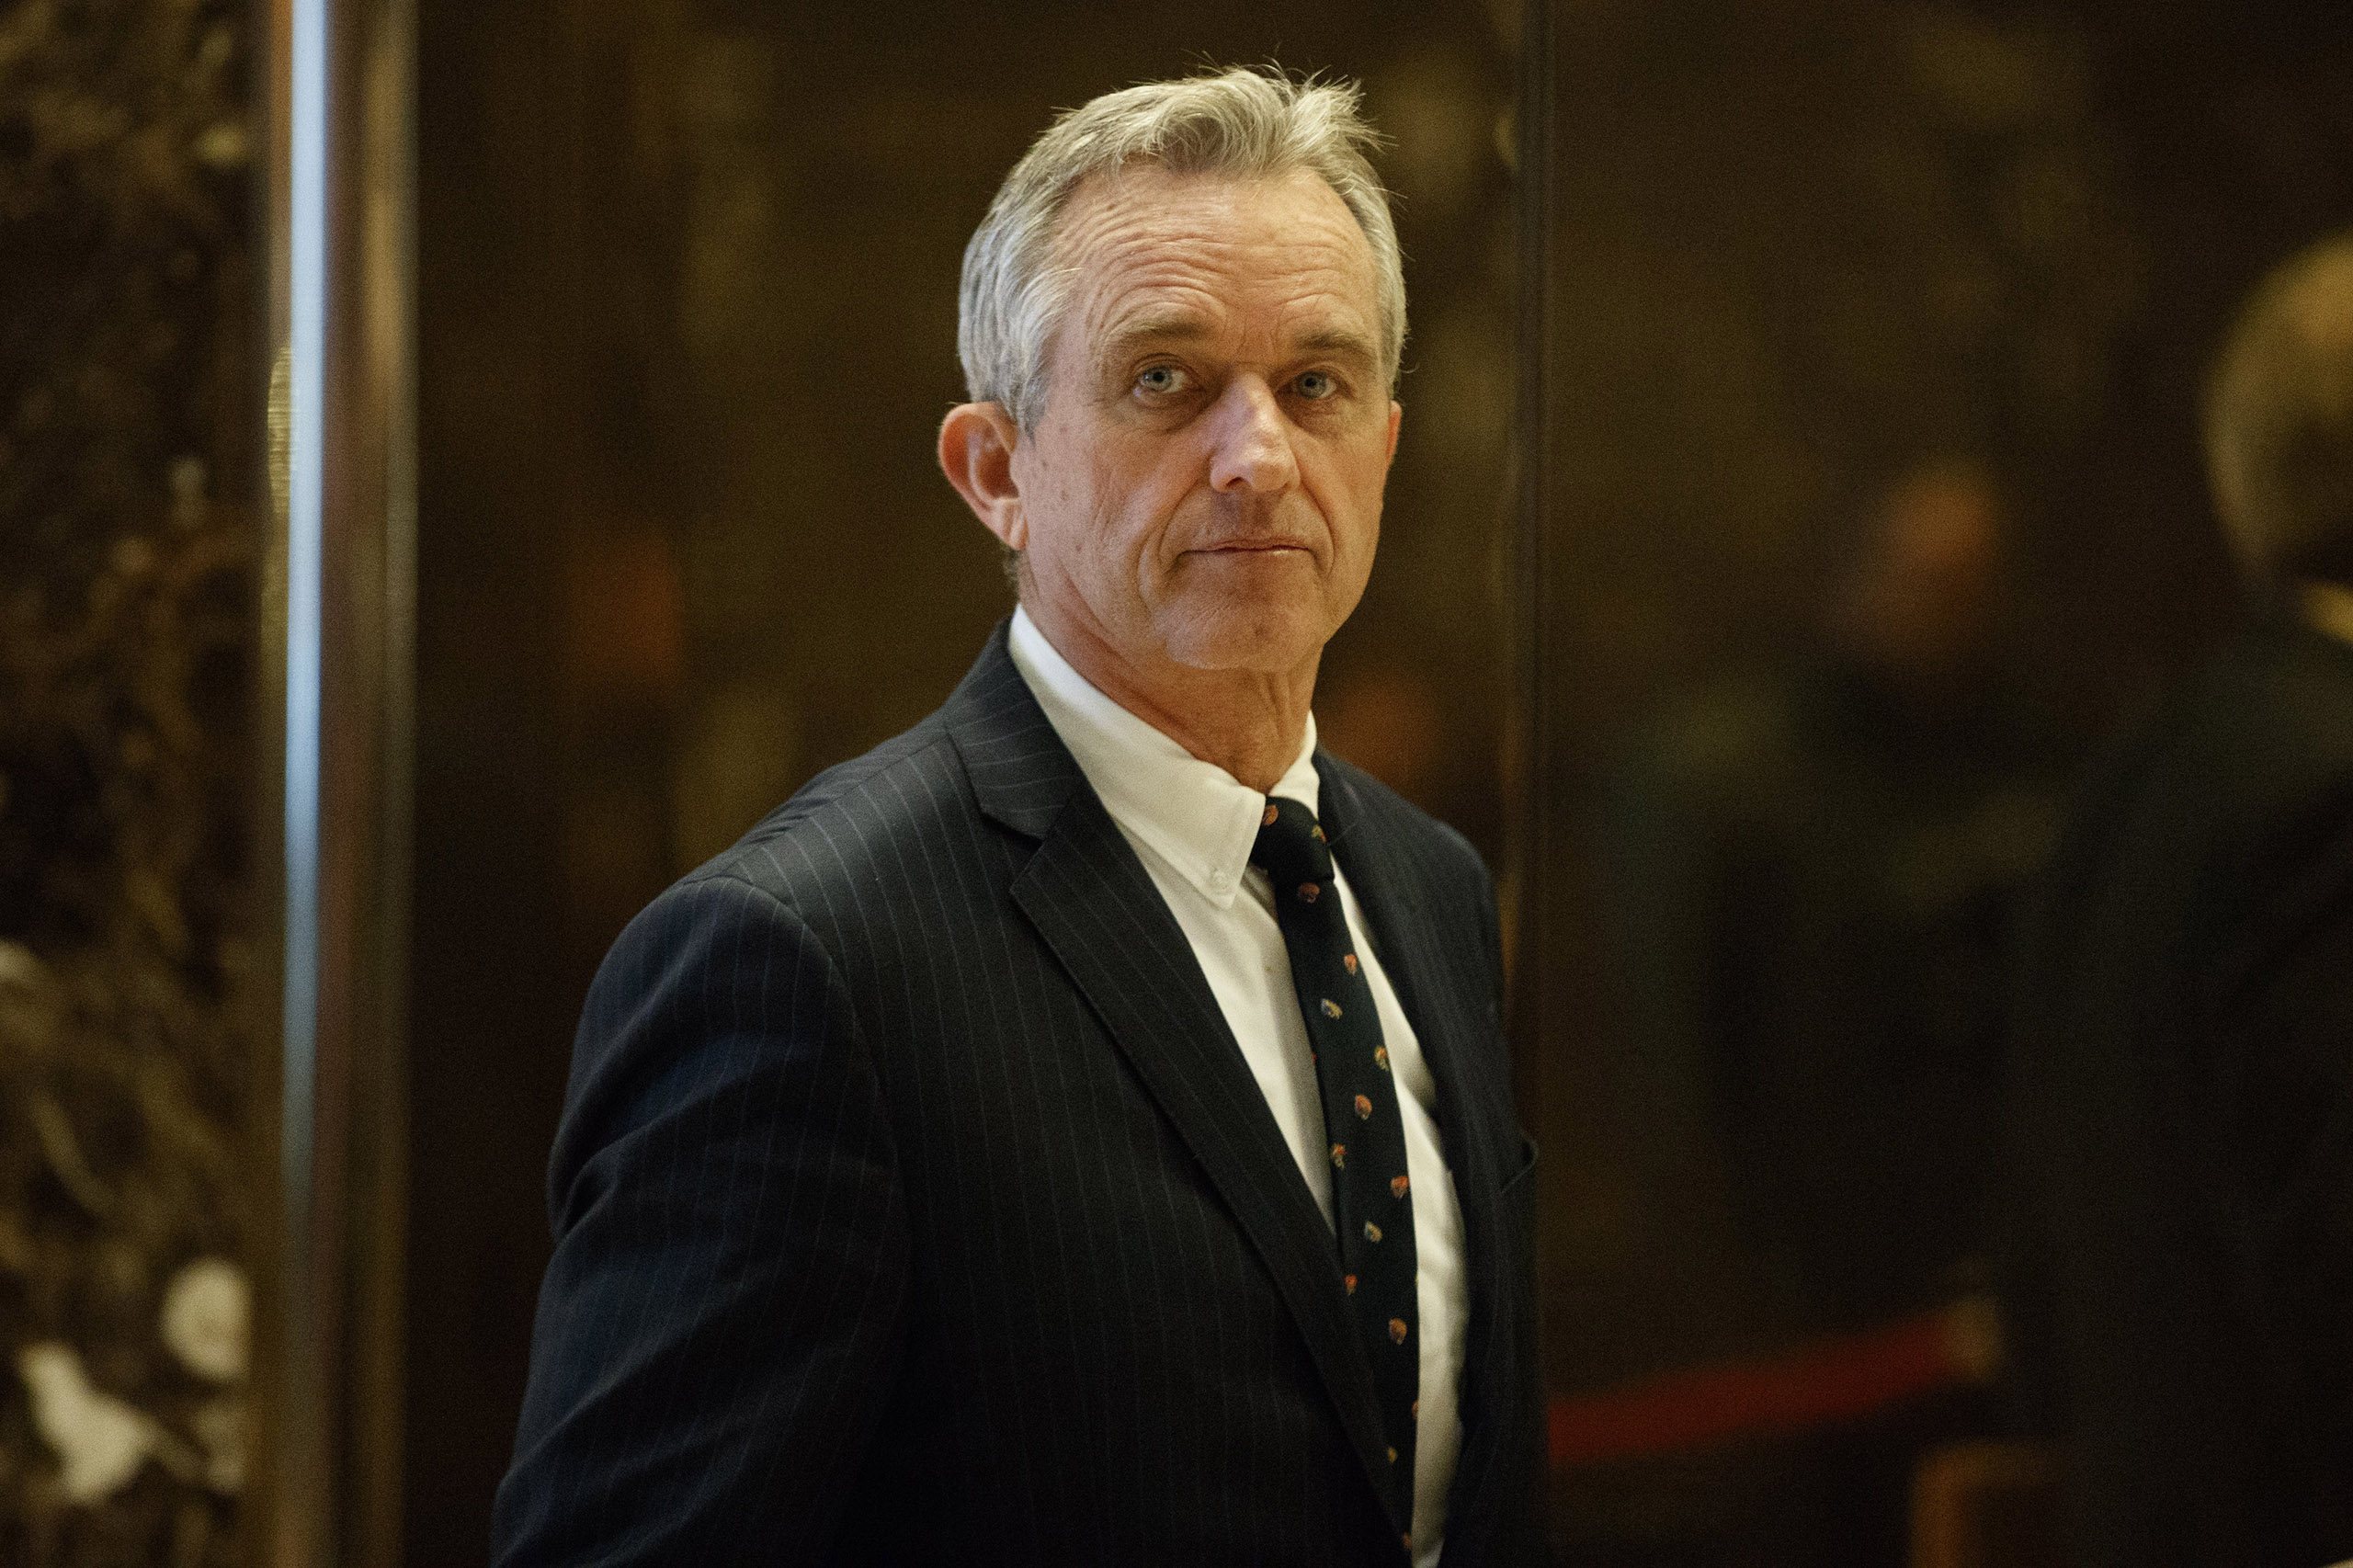 Robert F. Kennedy Jr. arrives in the lobby of Trump Tower for a meeting with President-elect Donald Trump, in New York, on Jan. 10, 2017. (Evan Vucci—AP)